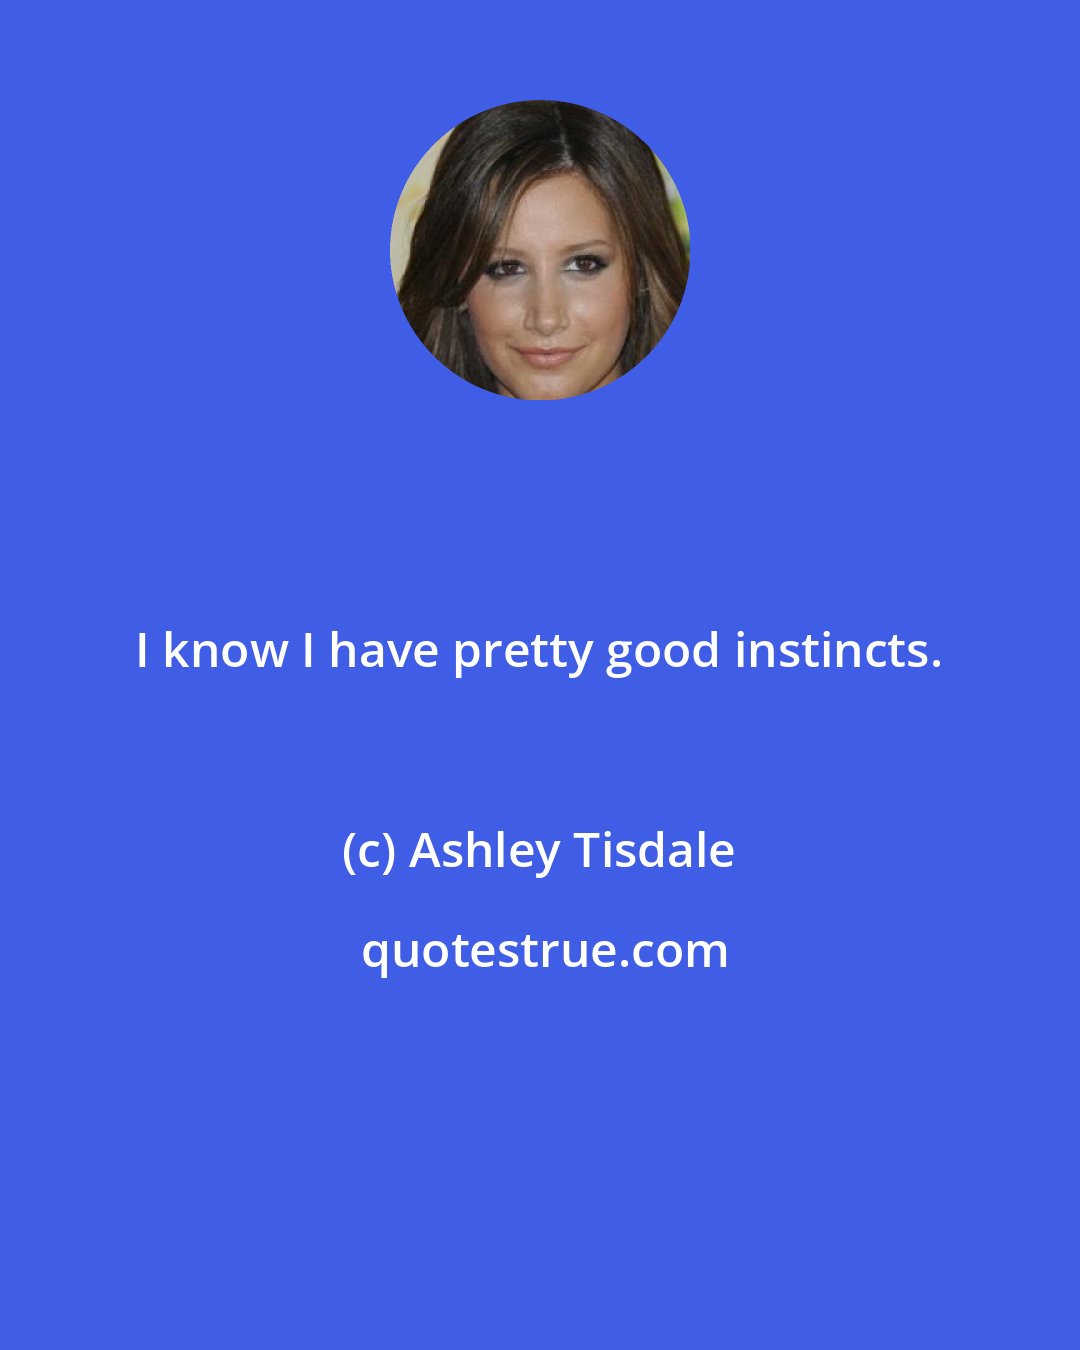 Ashley Tisdale: I know I have pretty good instincts.